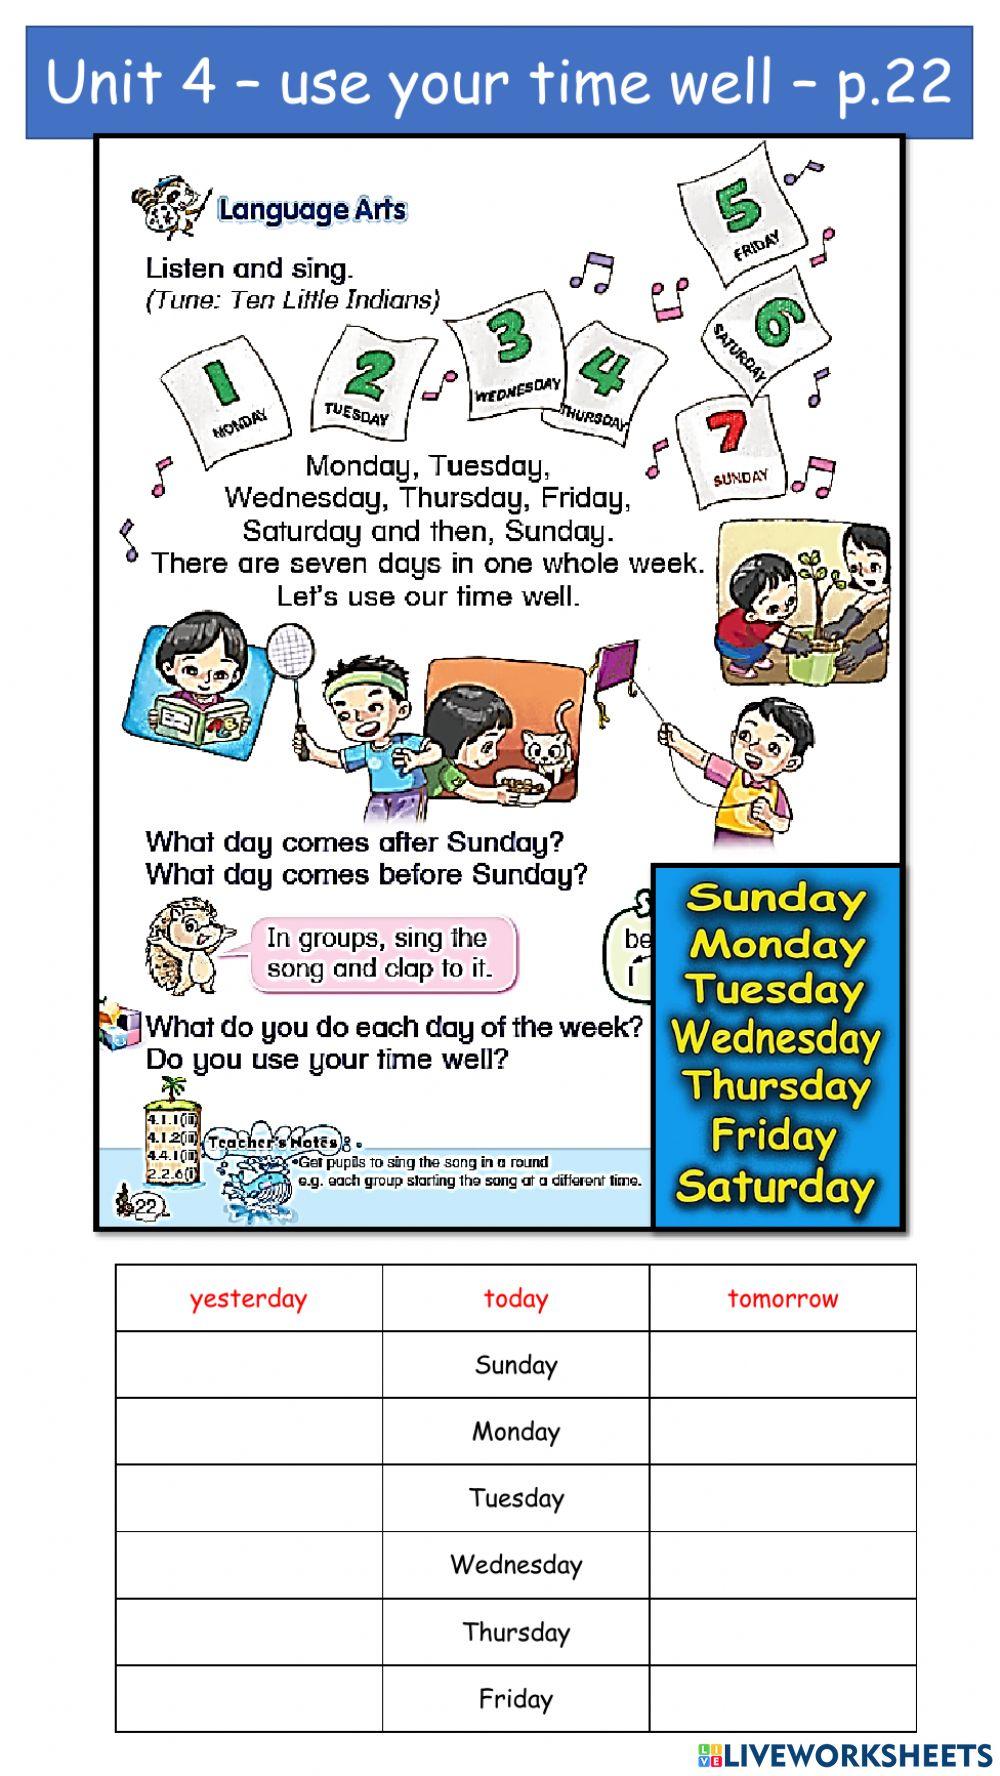 Standard 1 English - unit 4 - use your time well